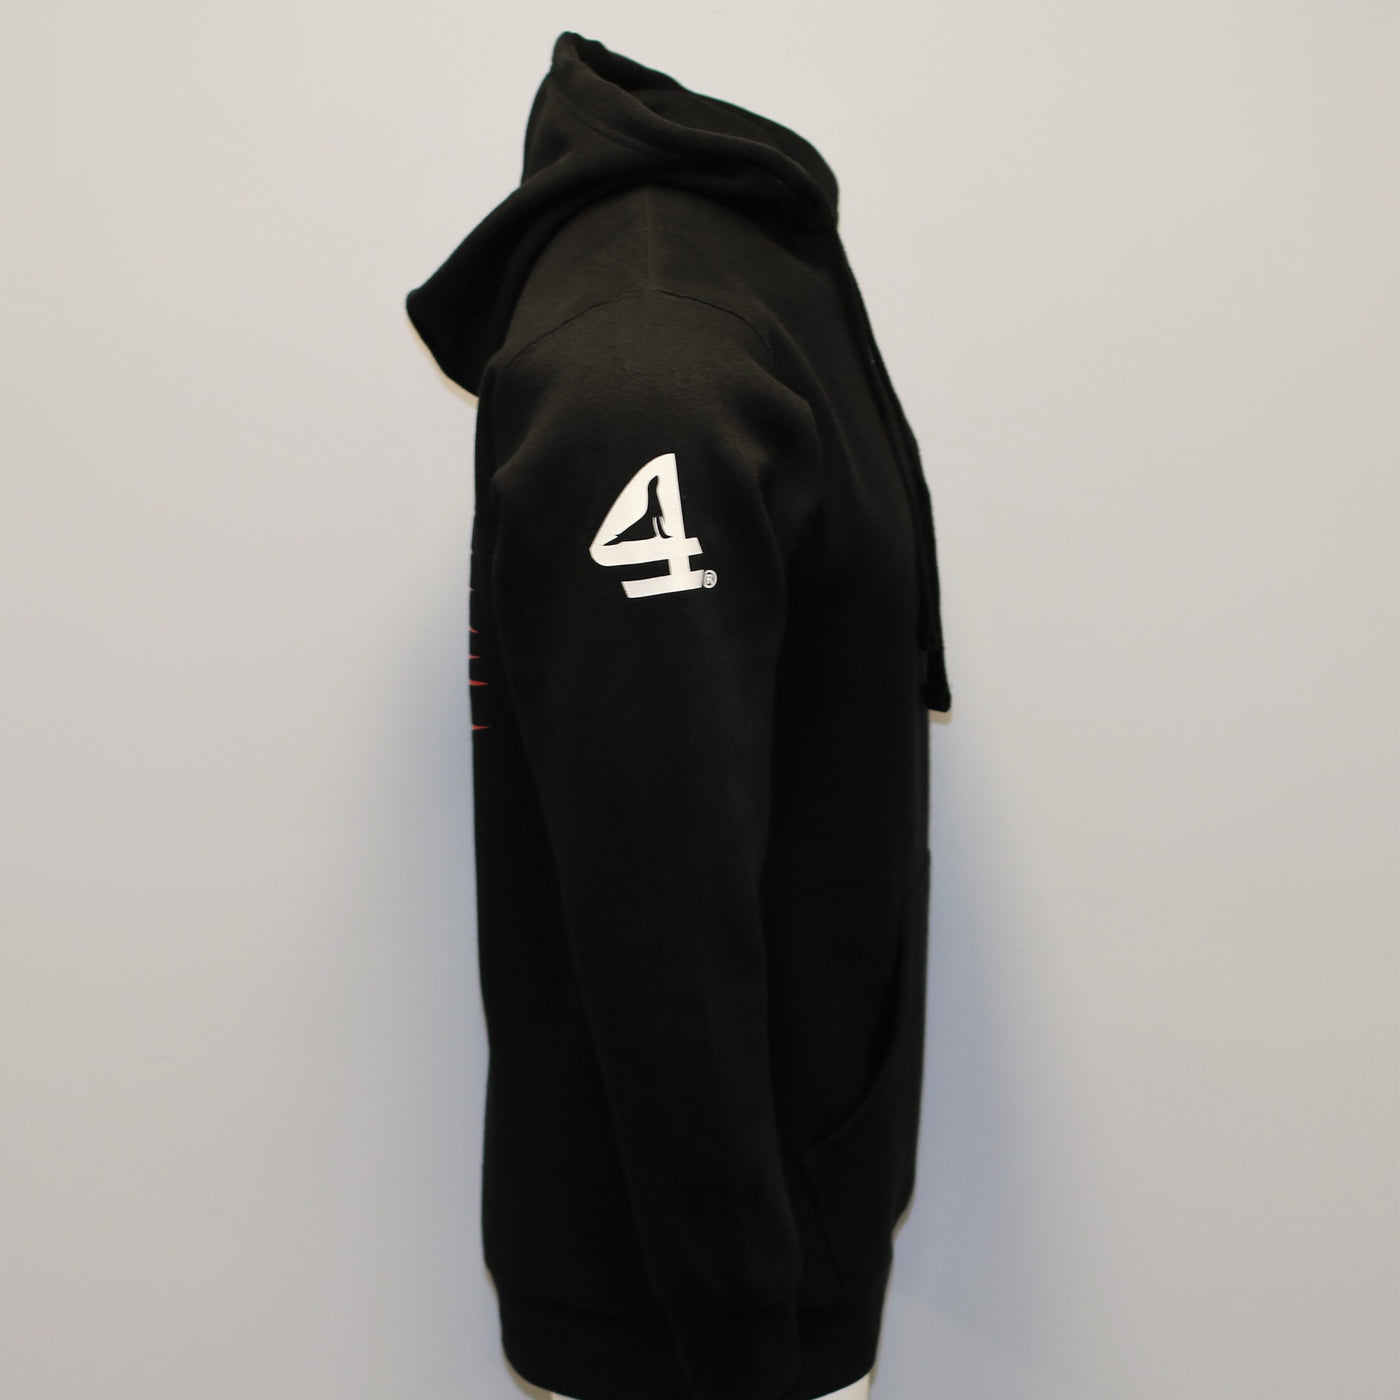 Youth Black USA Surfer Pullover